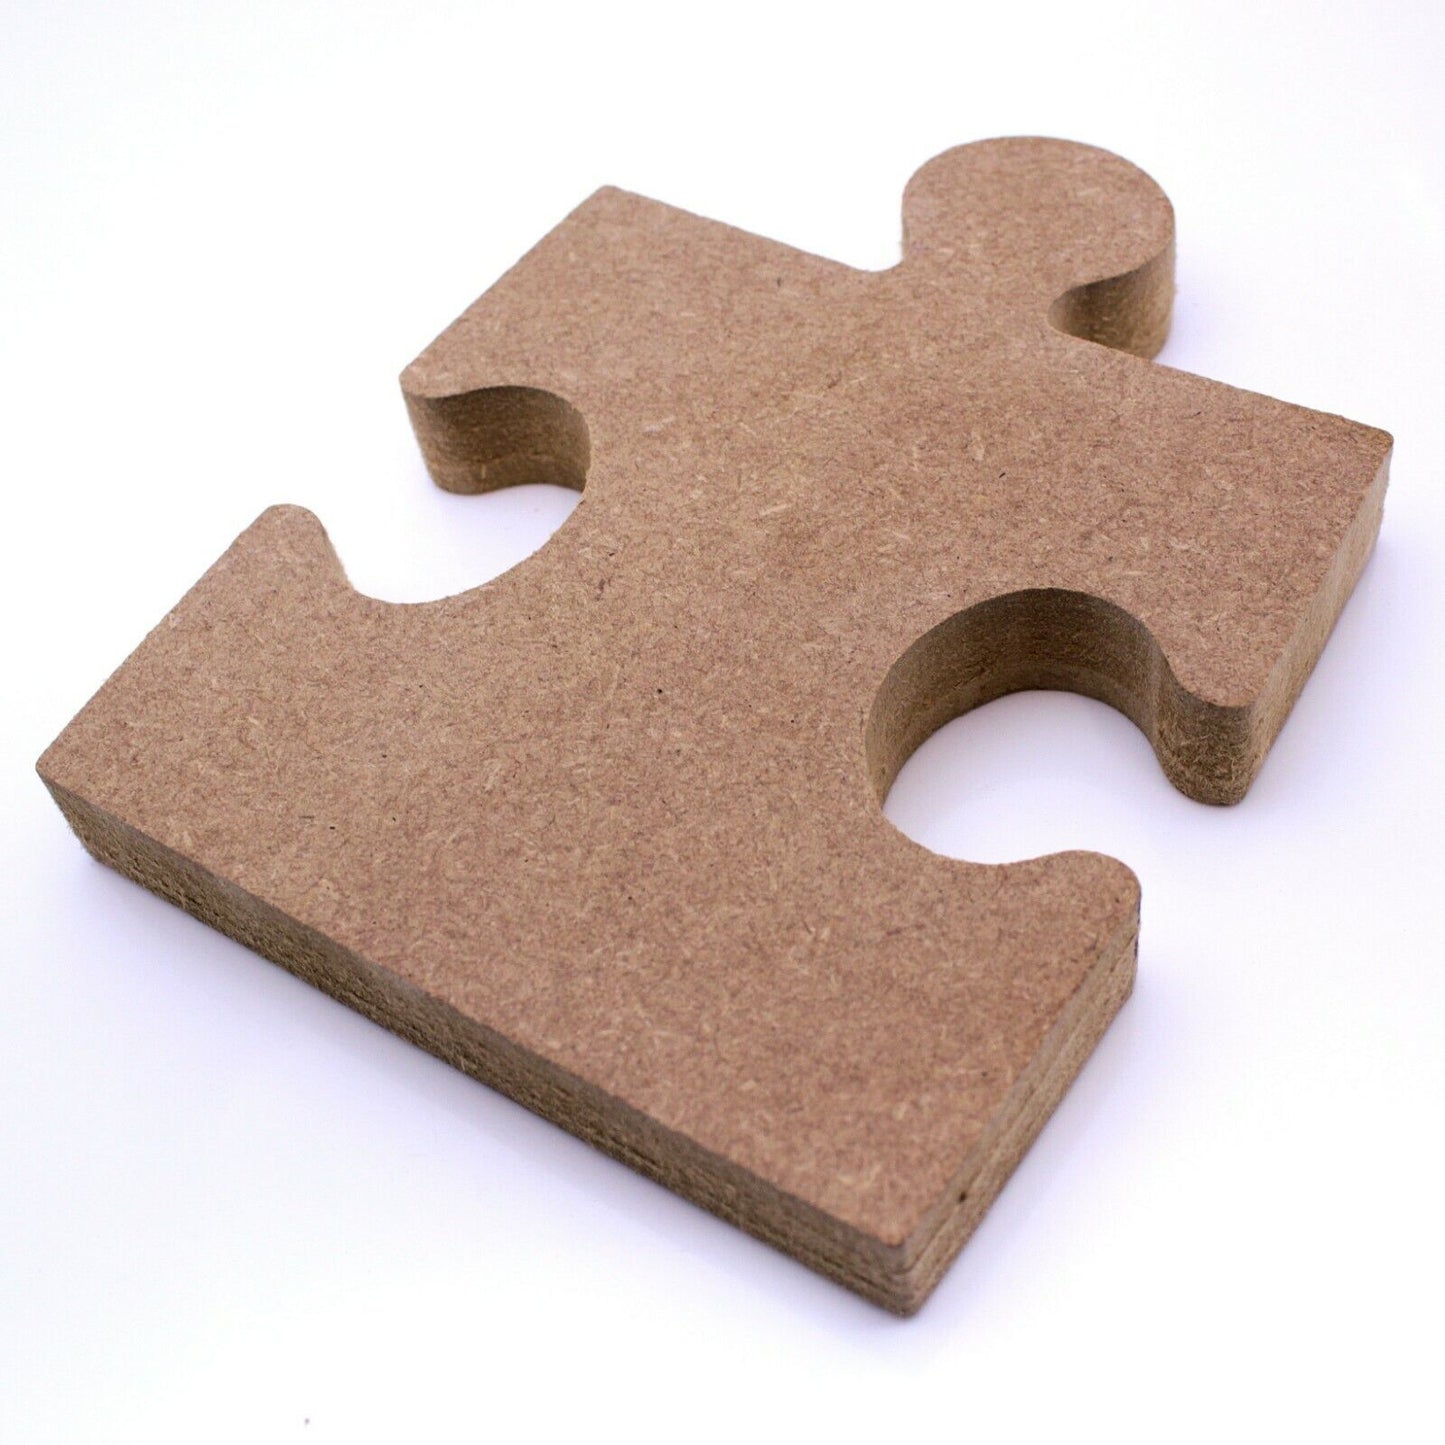 Free Standing 18mm MDF Jigsaw Craft Shape. 10cm to 30cm. Puzzle